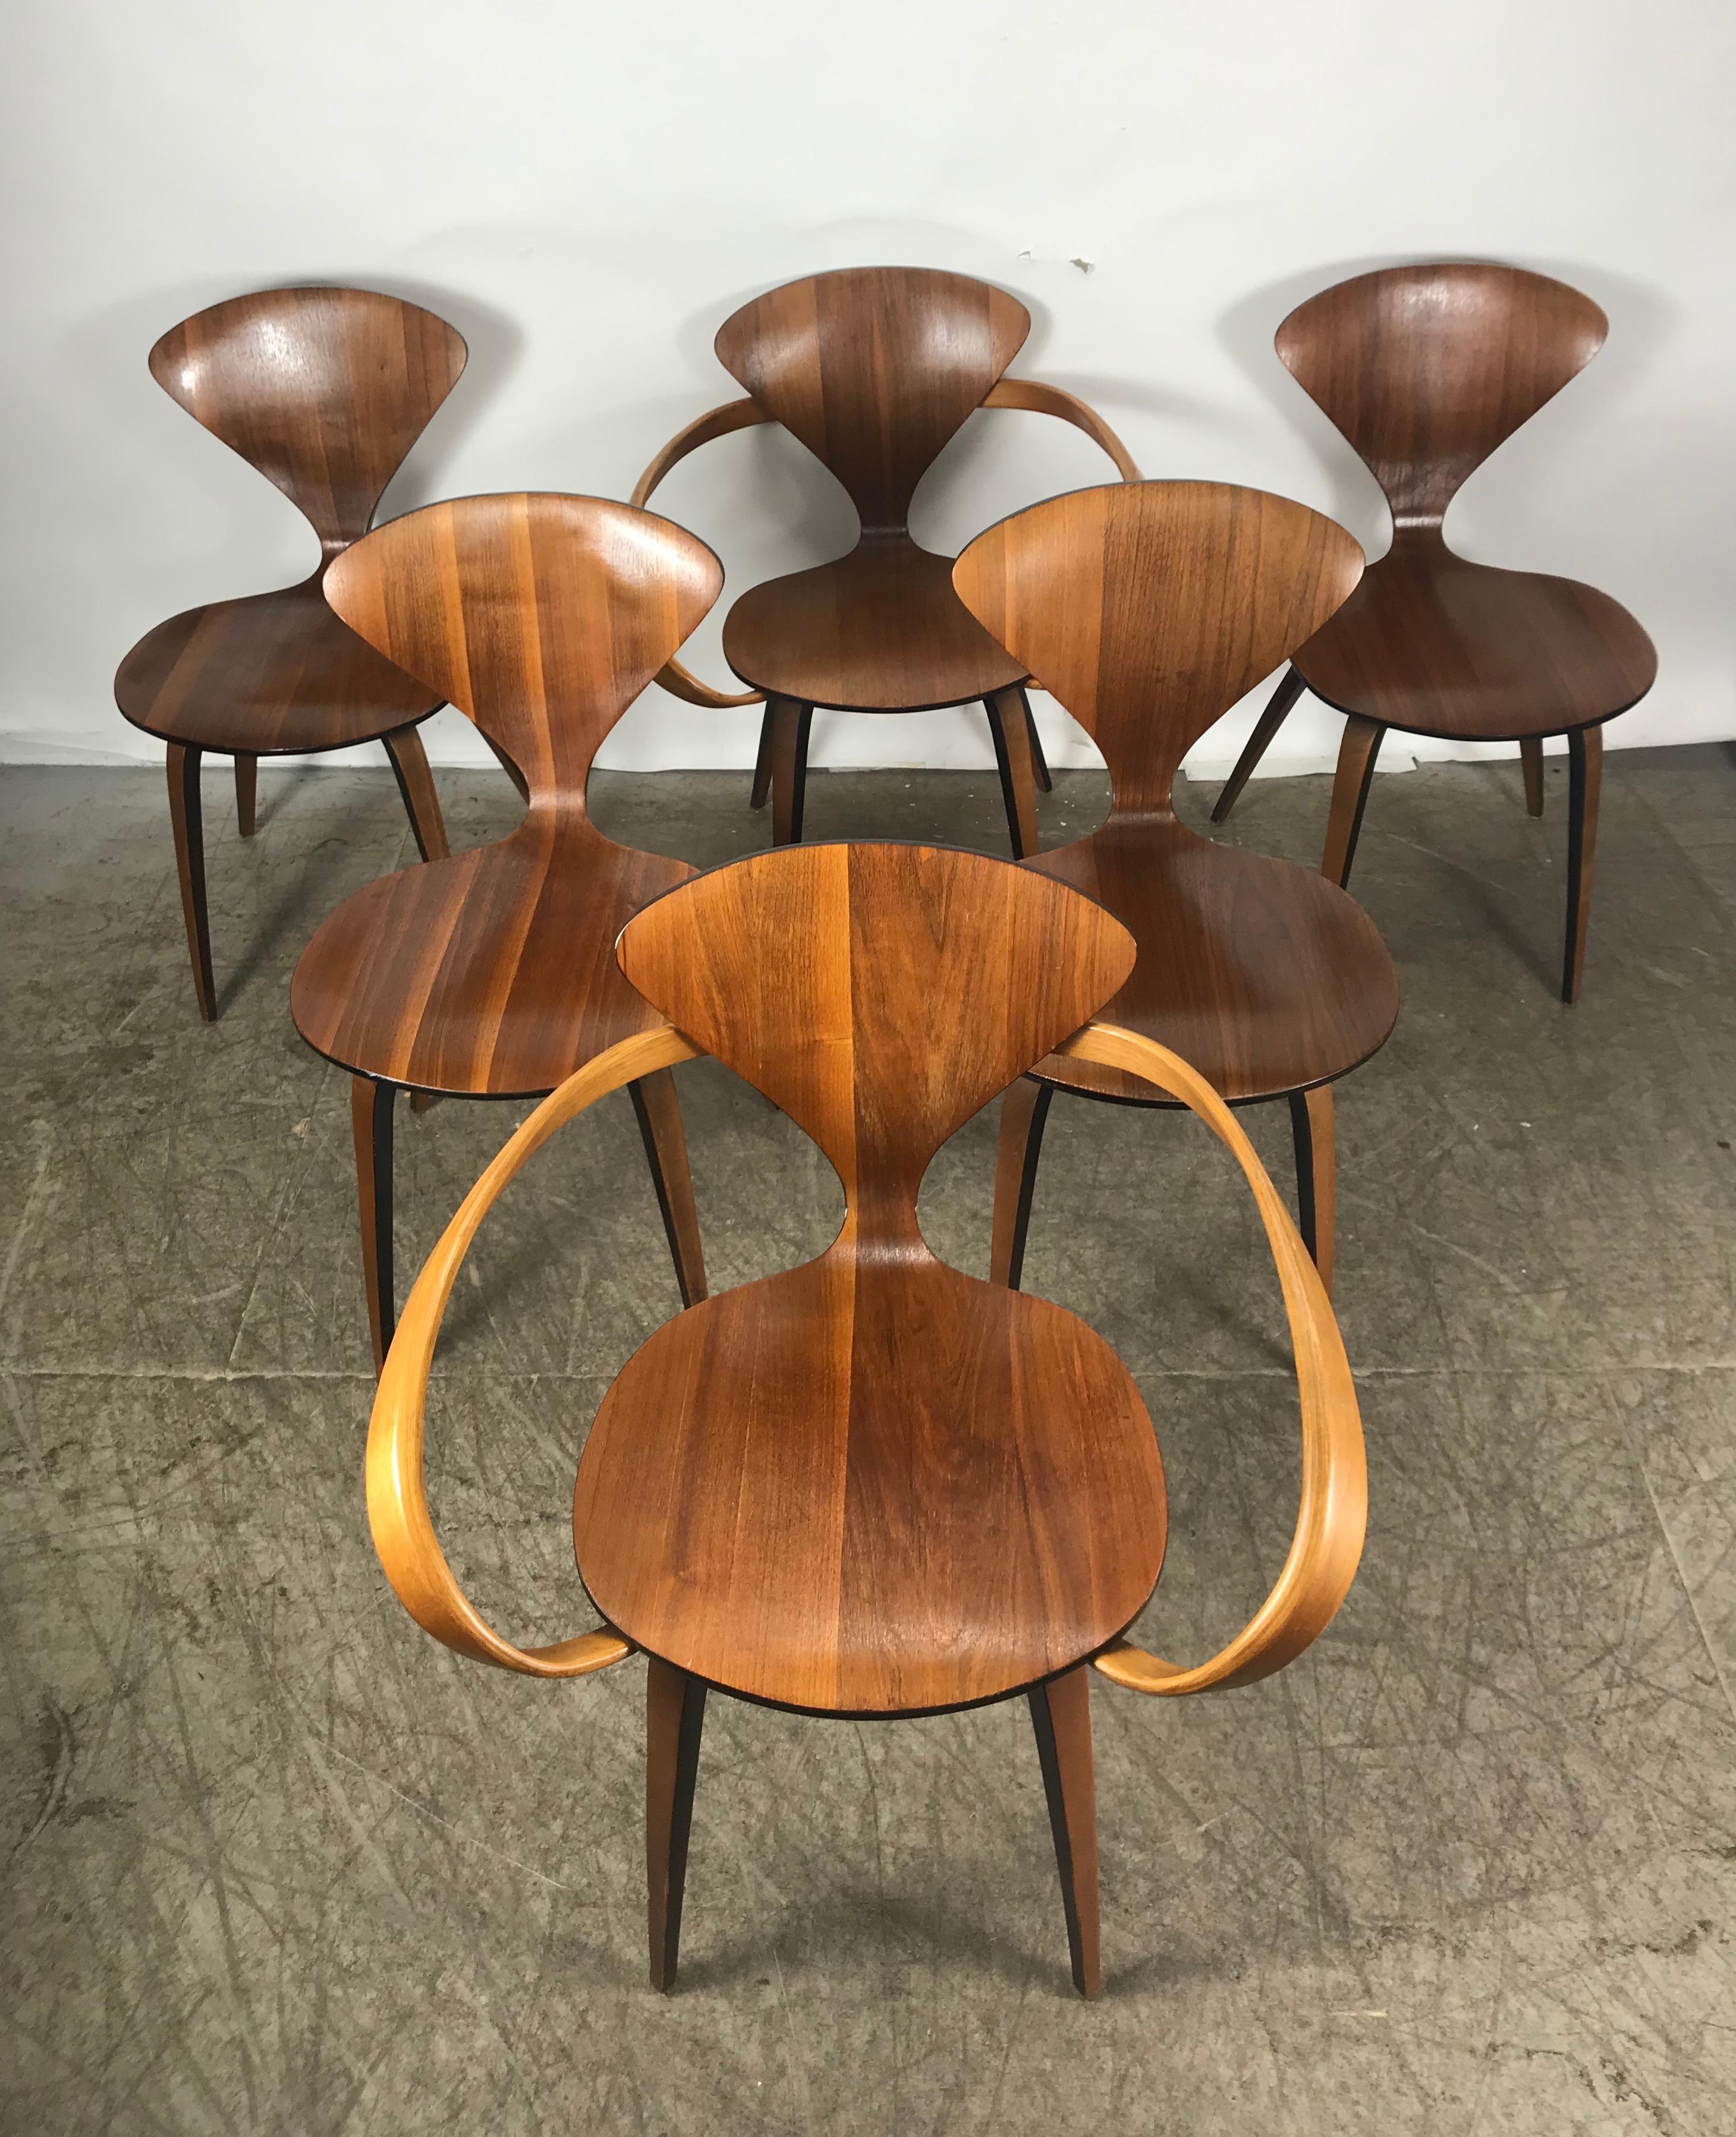 Walnut Classic Set of 6 Dining Chairs by Norman Cherner for Plycraft, Pretzel Captain